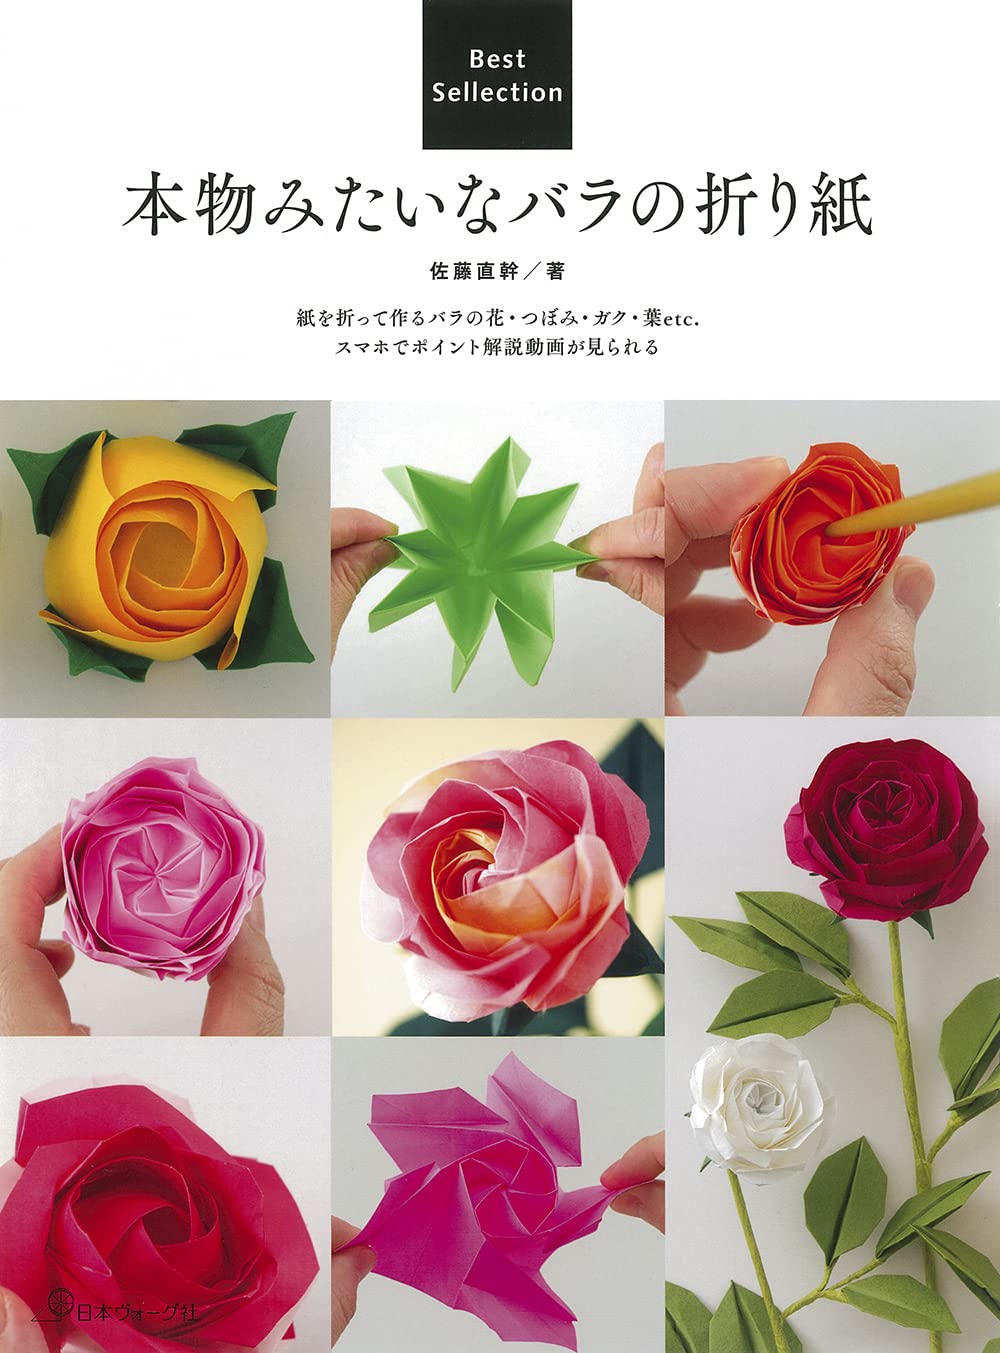 Origami of real roses